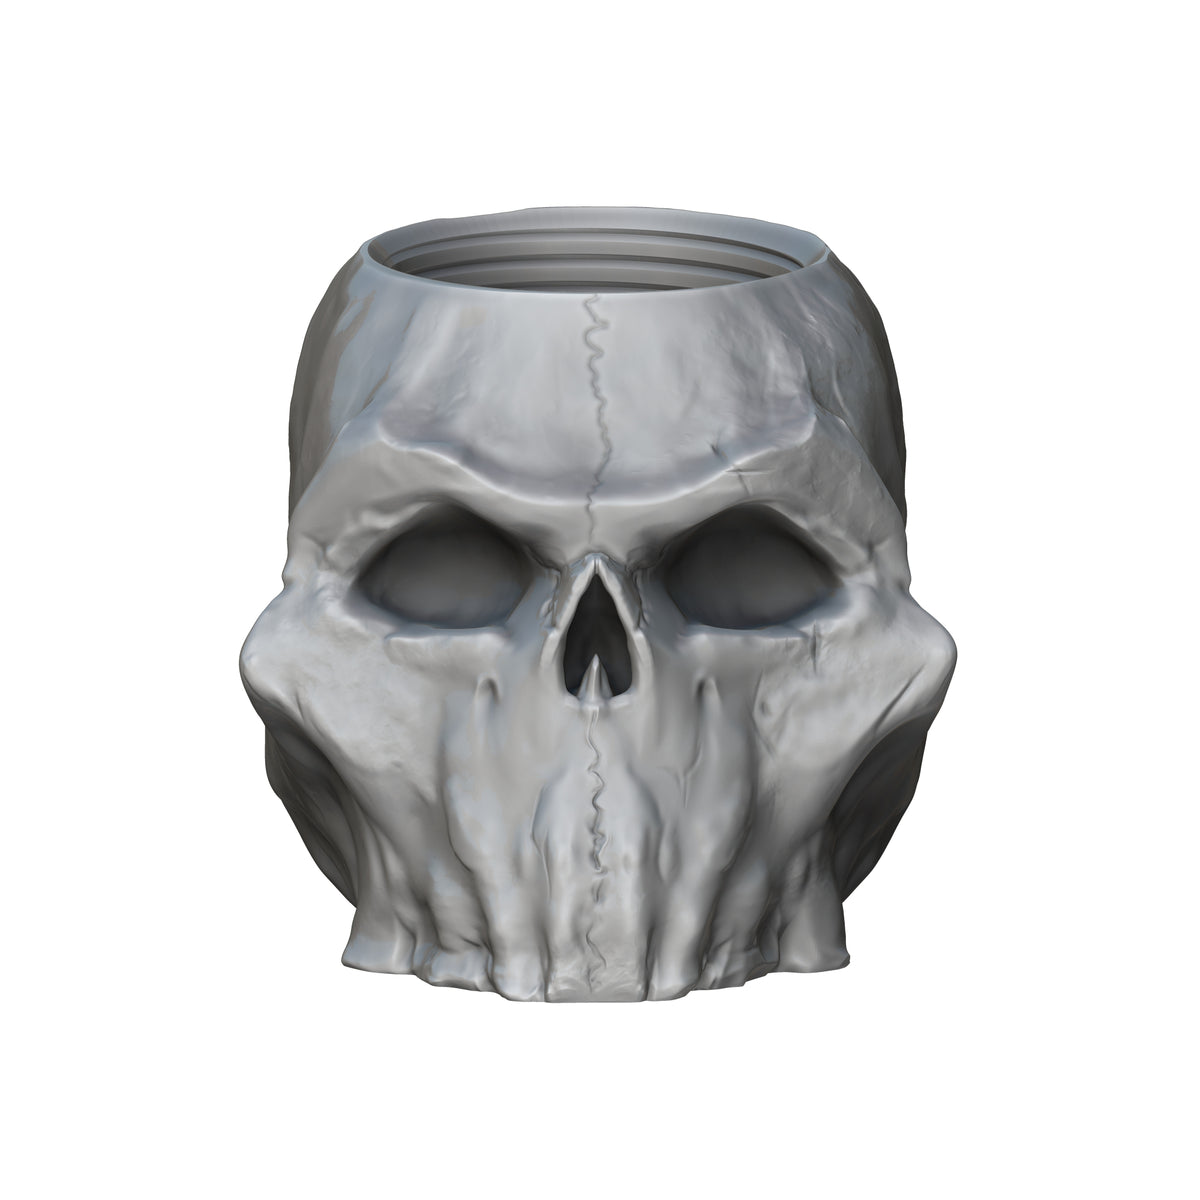 Orc Skull Dice Box Storage Container | Mythic Mugs